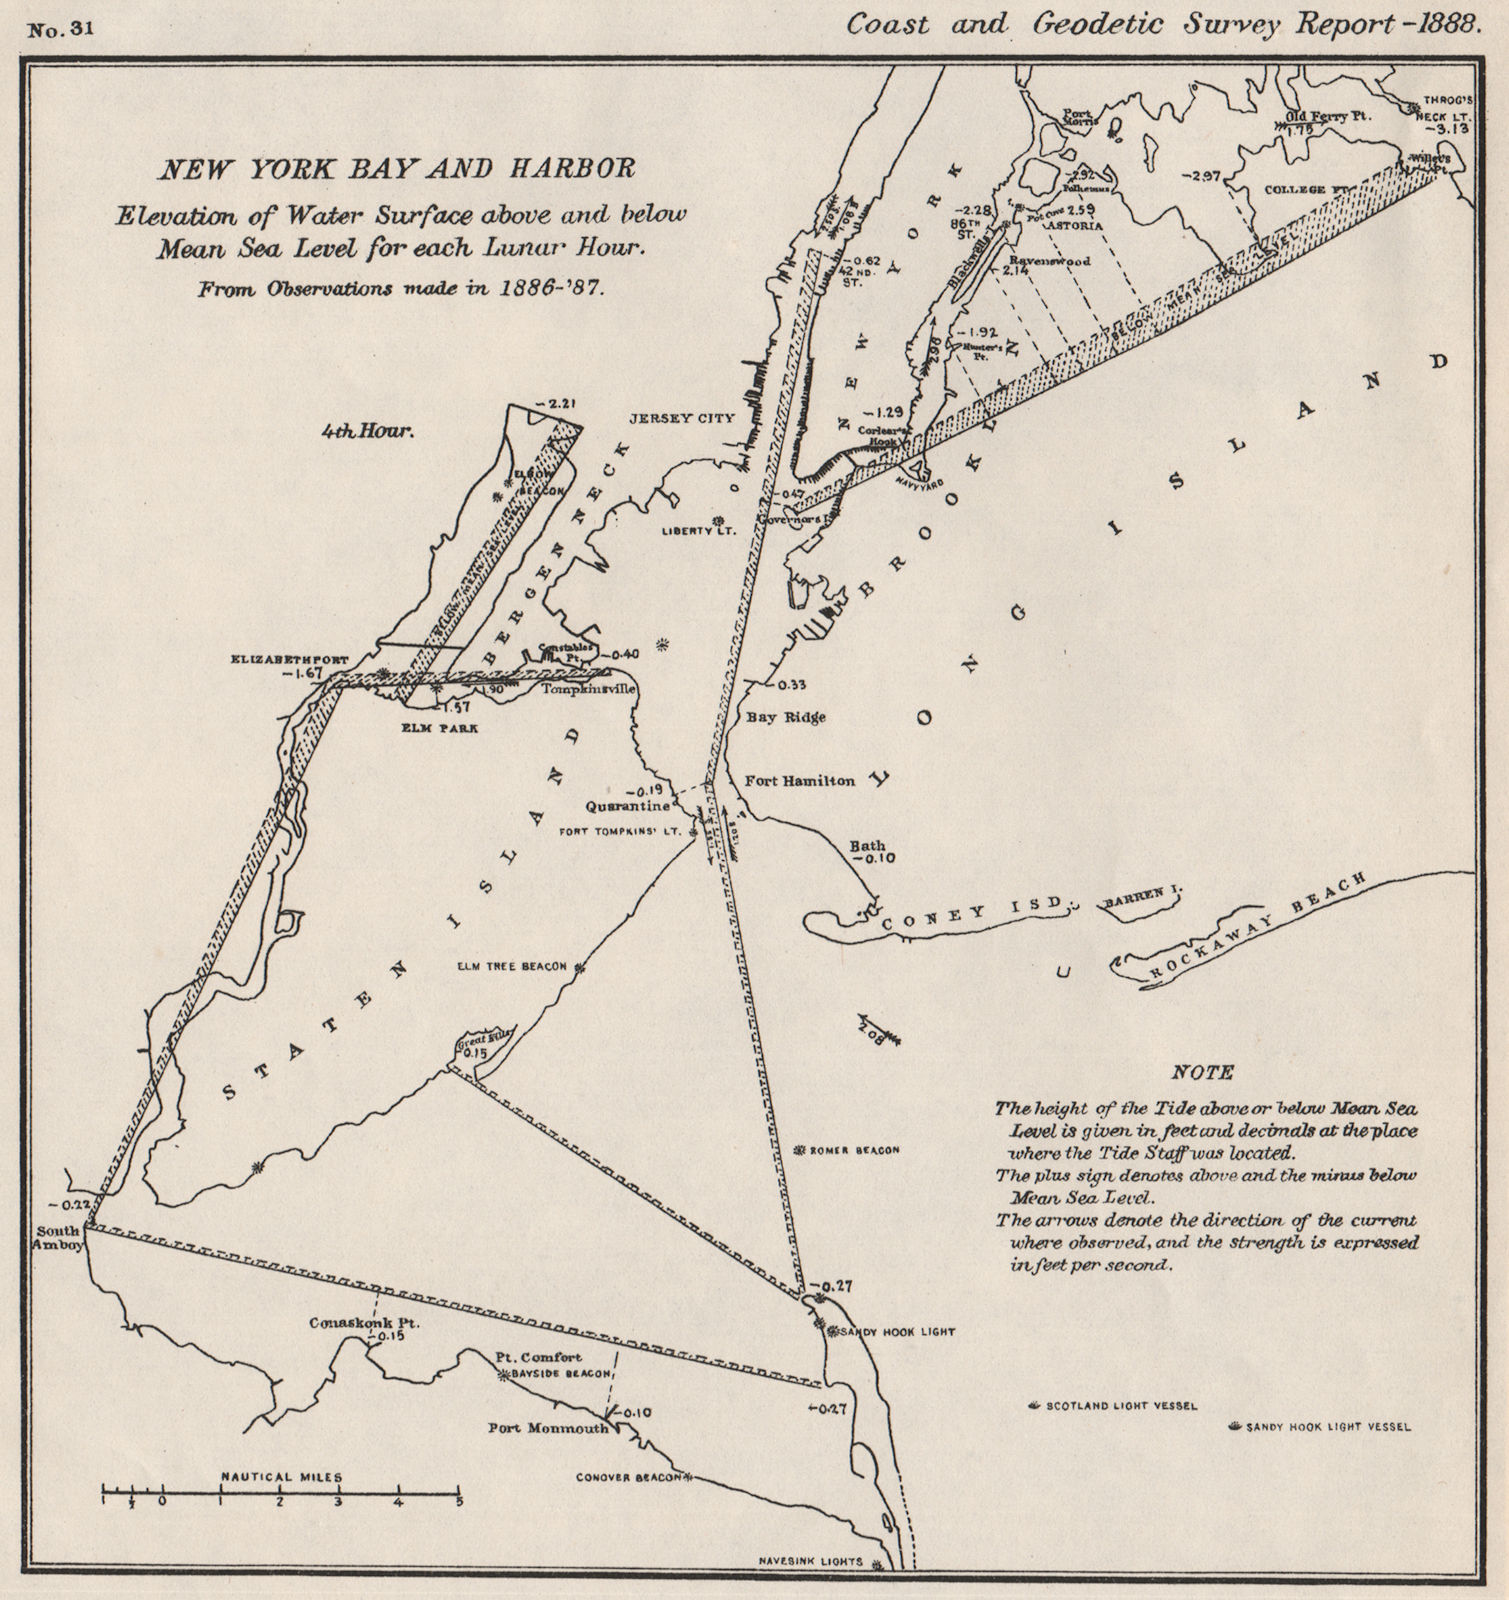 Associate Product NEW YORK BAY/HARBOR. Water level v mean sea level 4th Lunar Hour. USCGS 1889 map